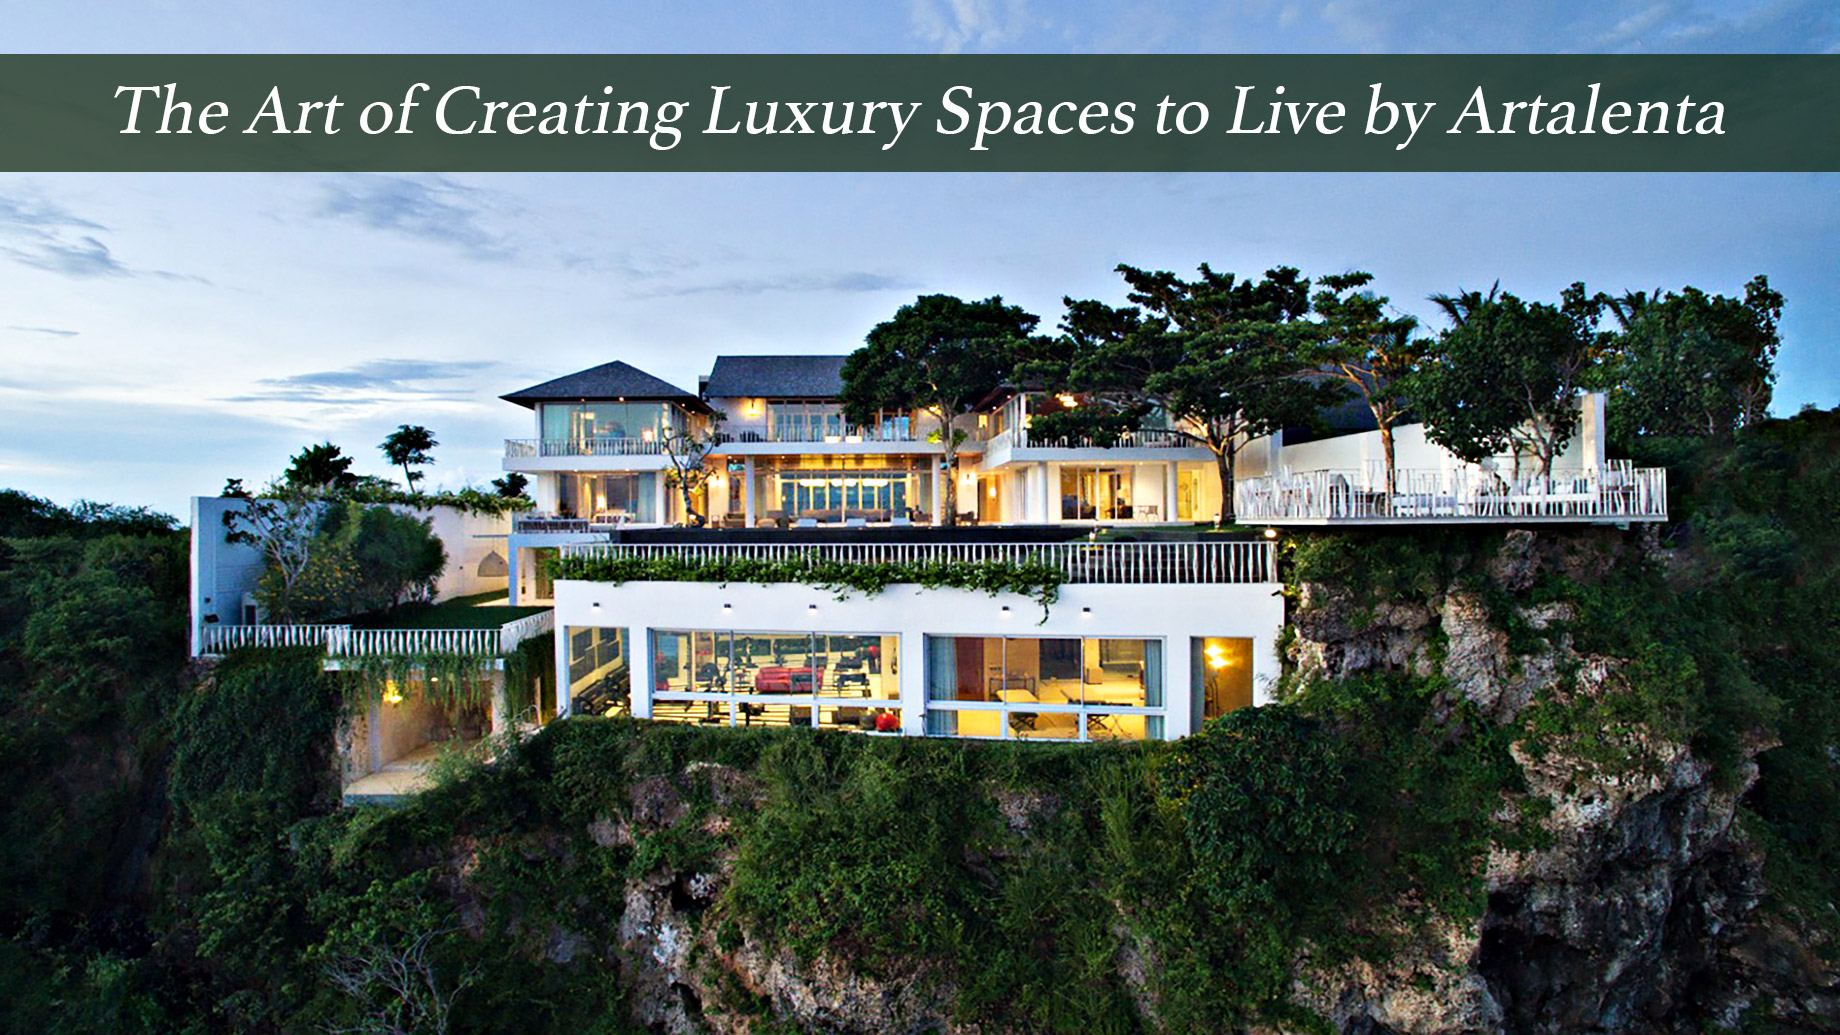 The Art of Creating Luxury Spaces to Live by Artalenta